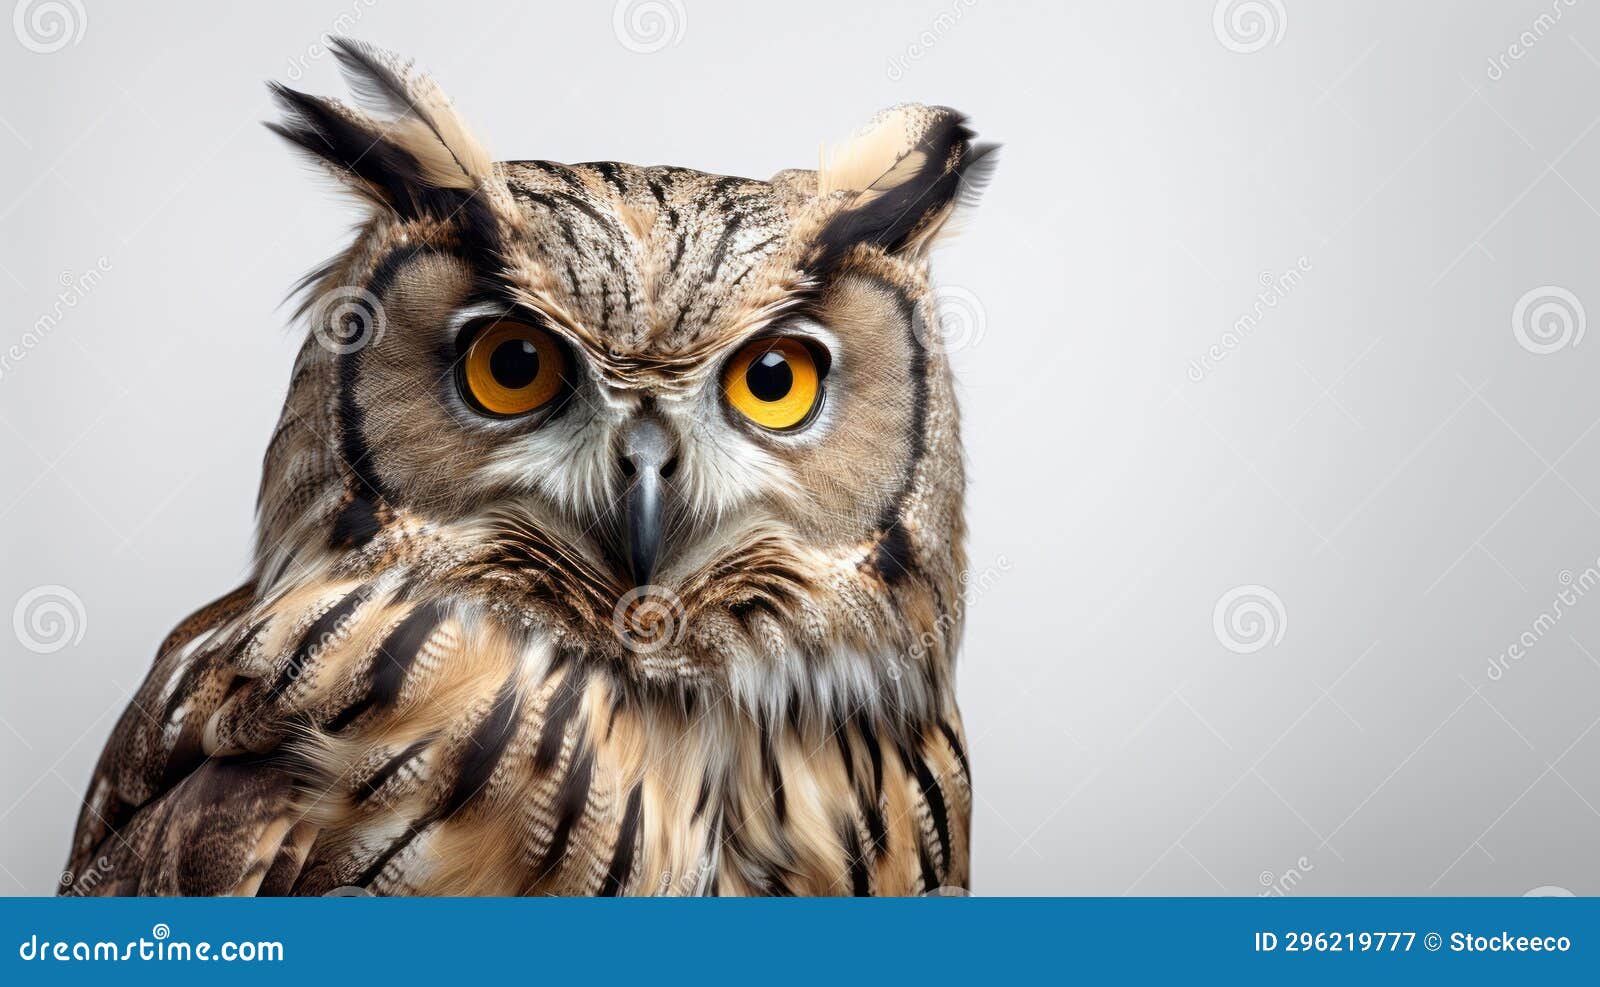 sleek and stylized eagle owl in the wild with yellow eyes